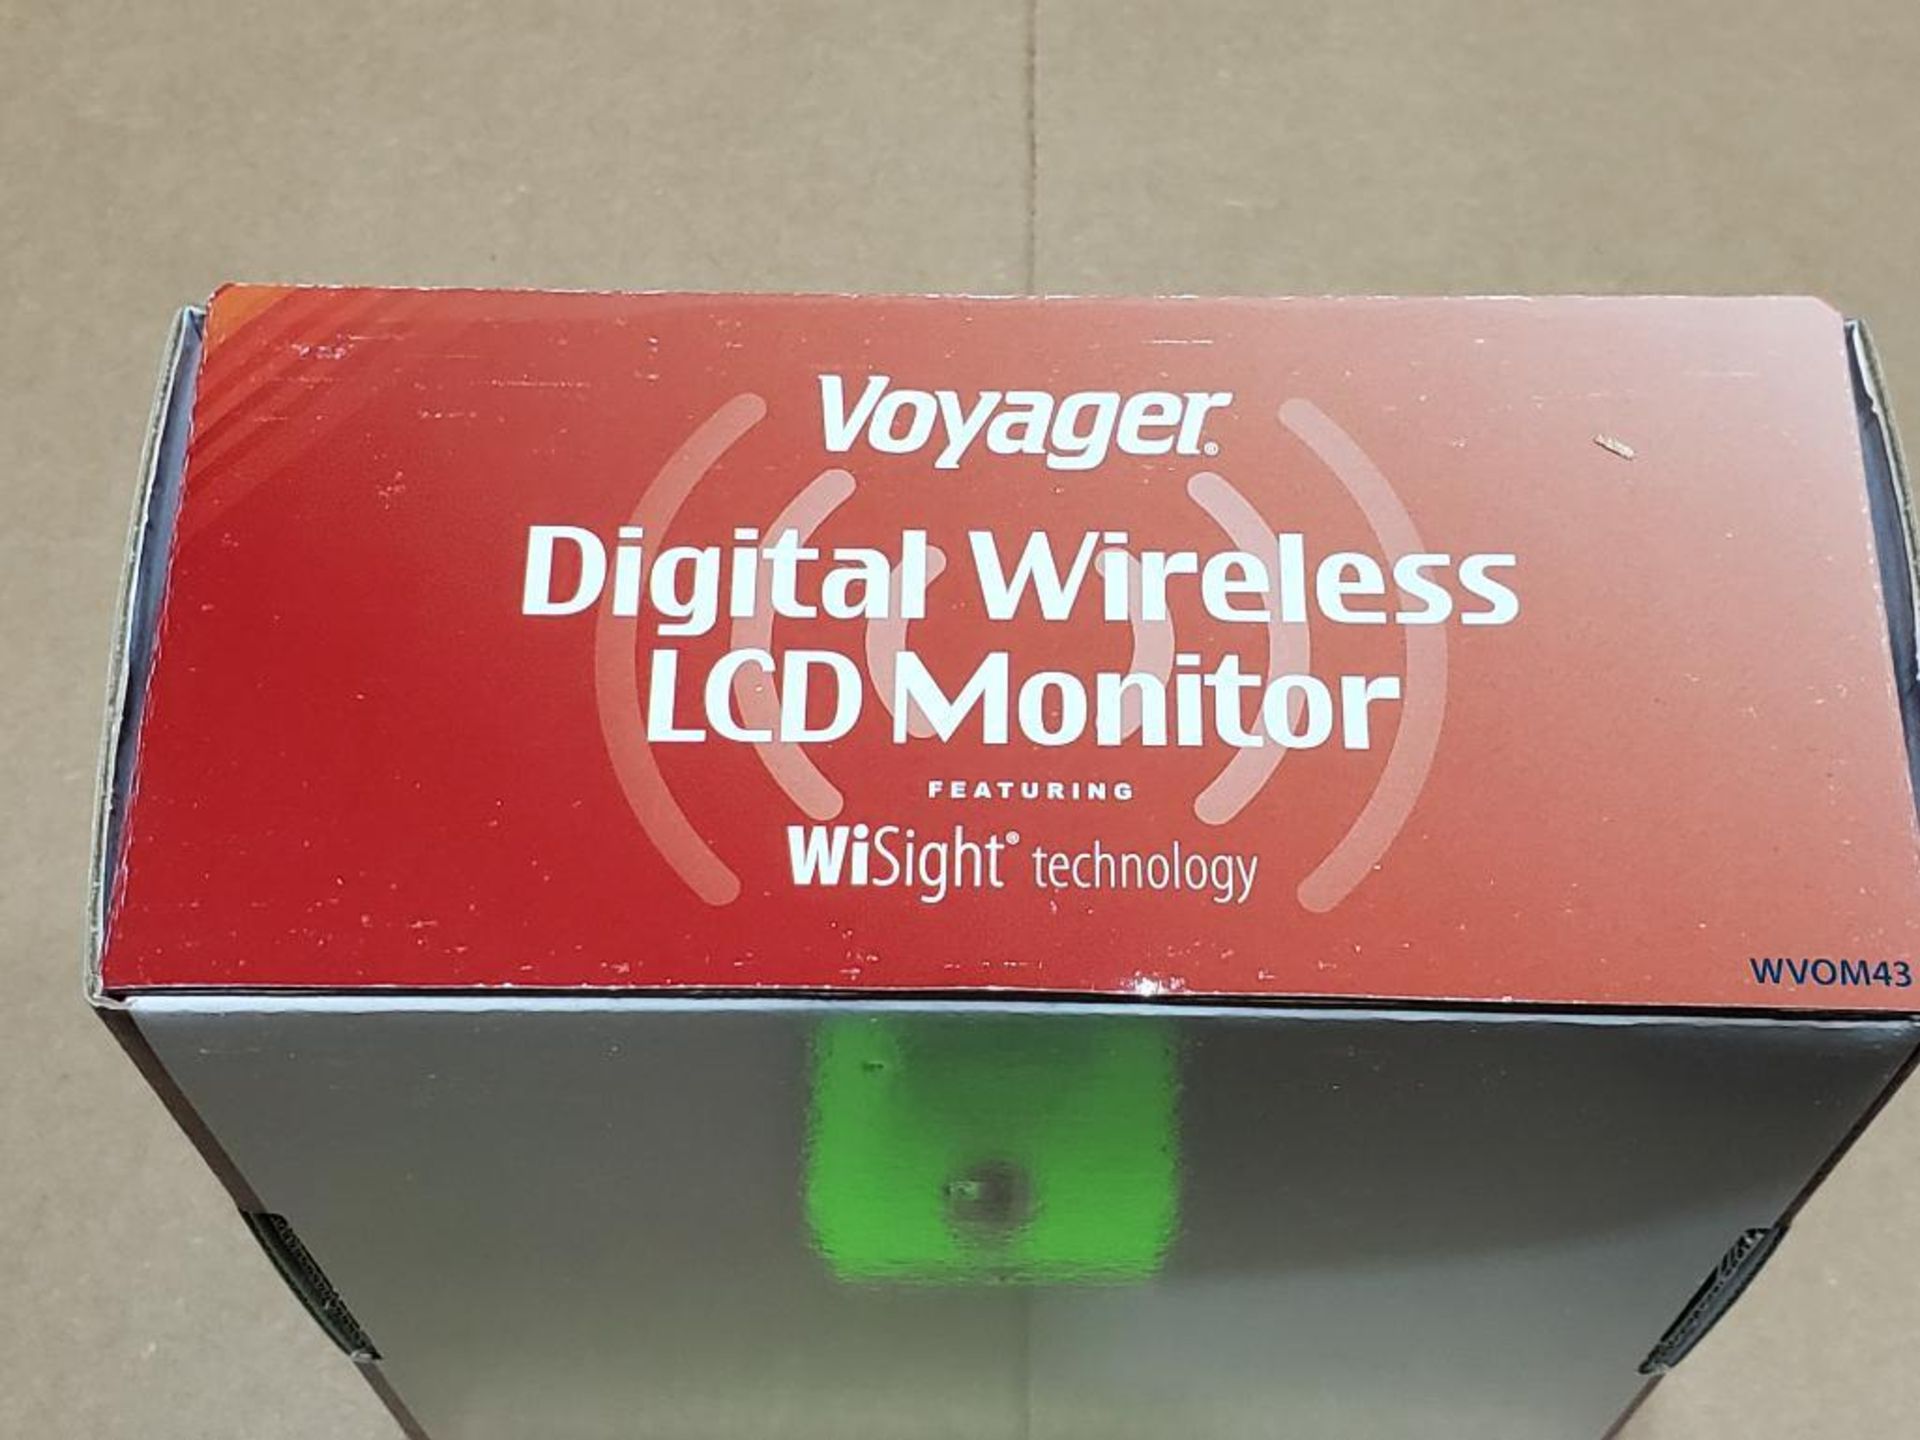 Voyager Digital Wireless LCD Monitor. Features WiSight techology. Model WVOM43. - Image 6 of 8